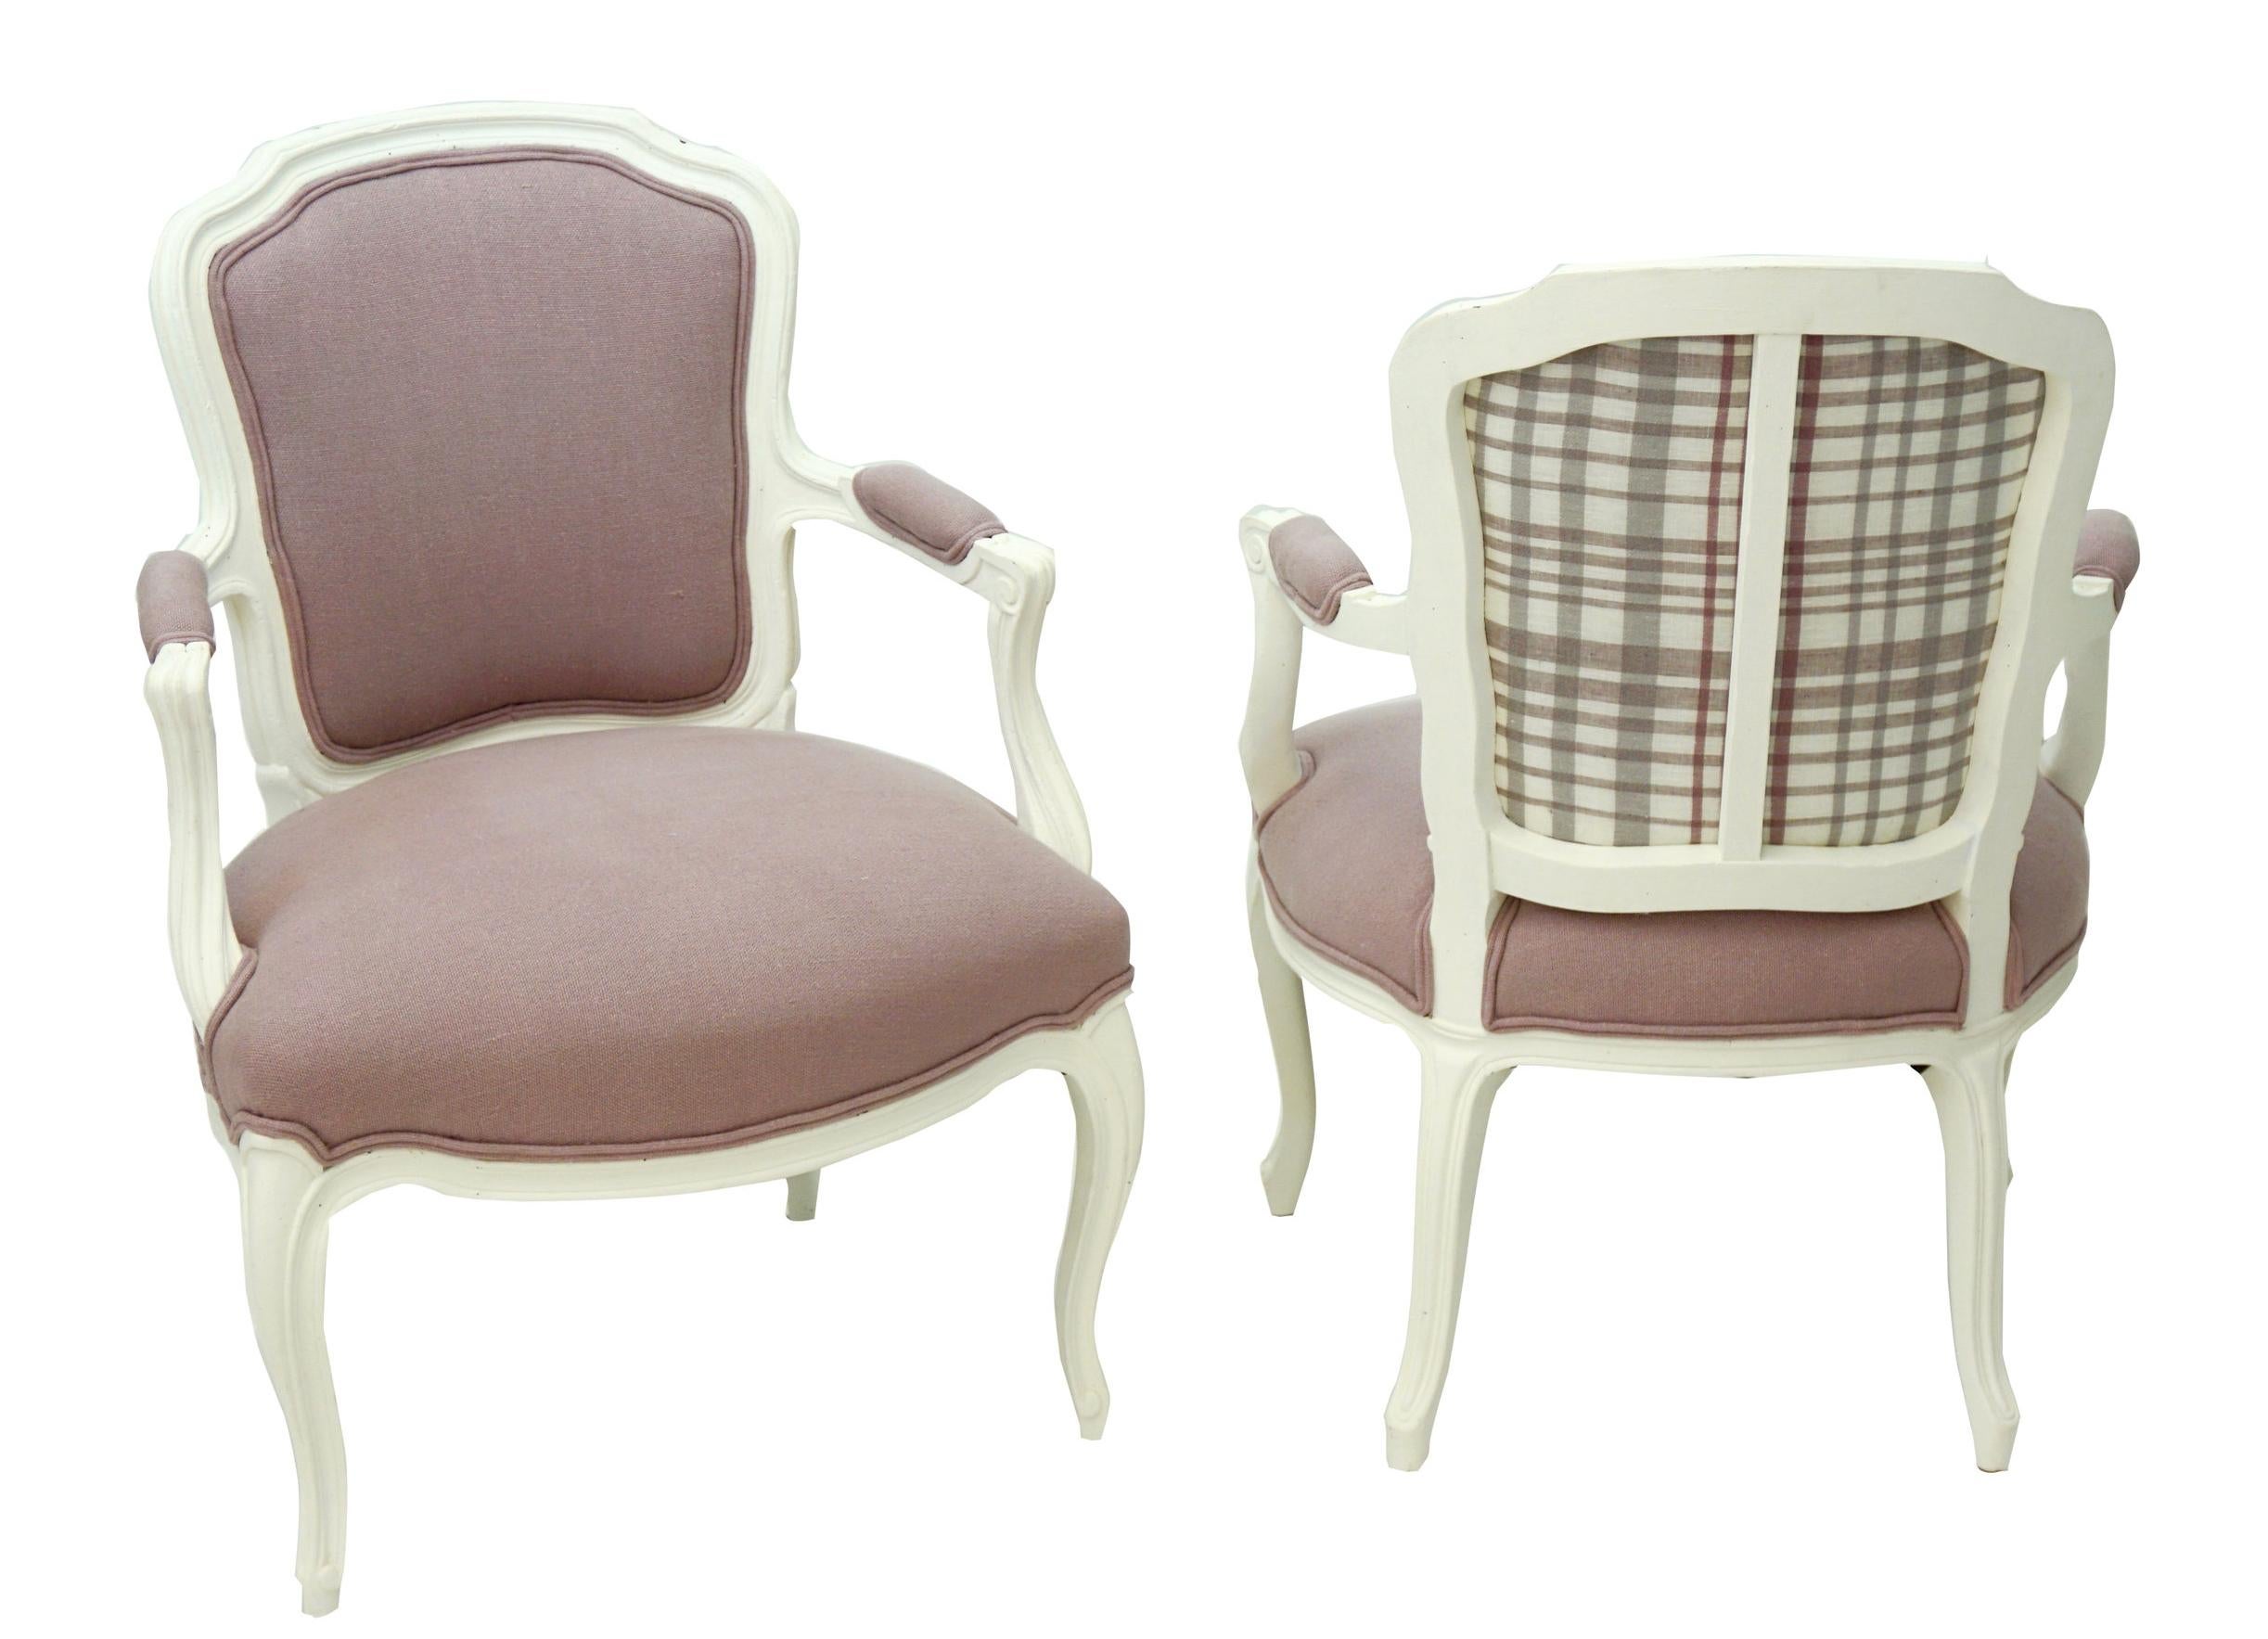 Pair of vintage French Louis XV style armchairs. Newly upholstered in lavender linen and painted white.

Each Measures: 14.5